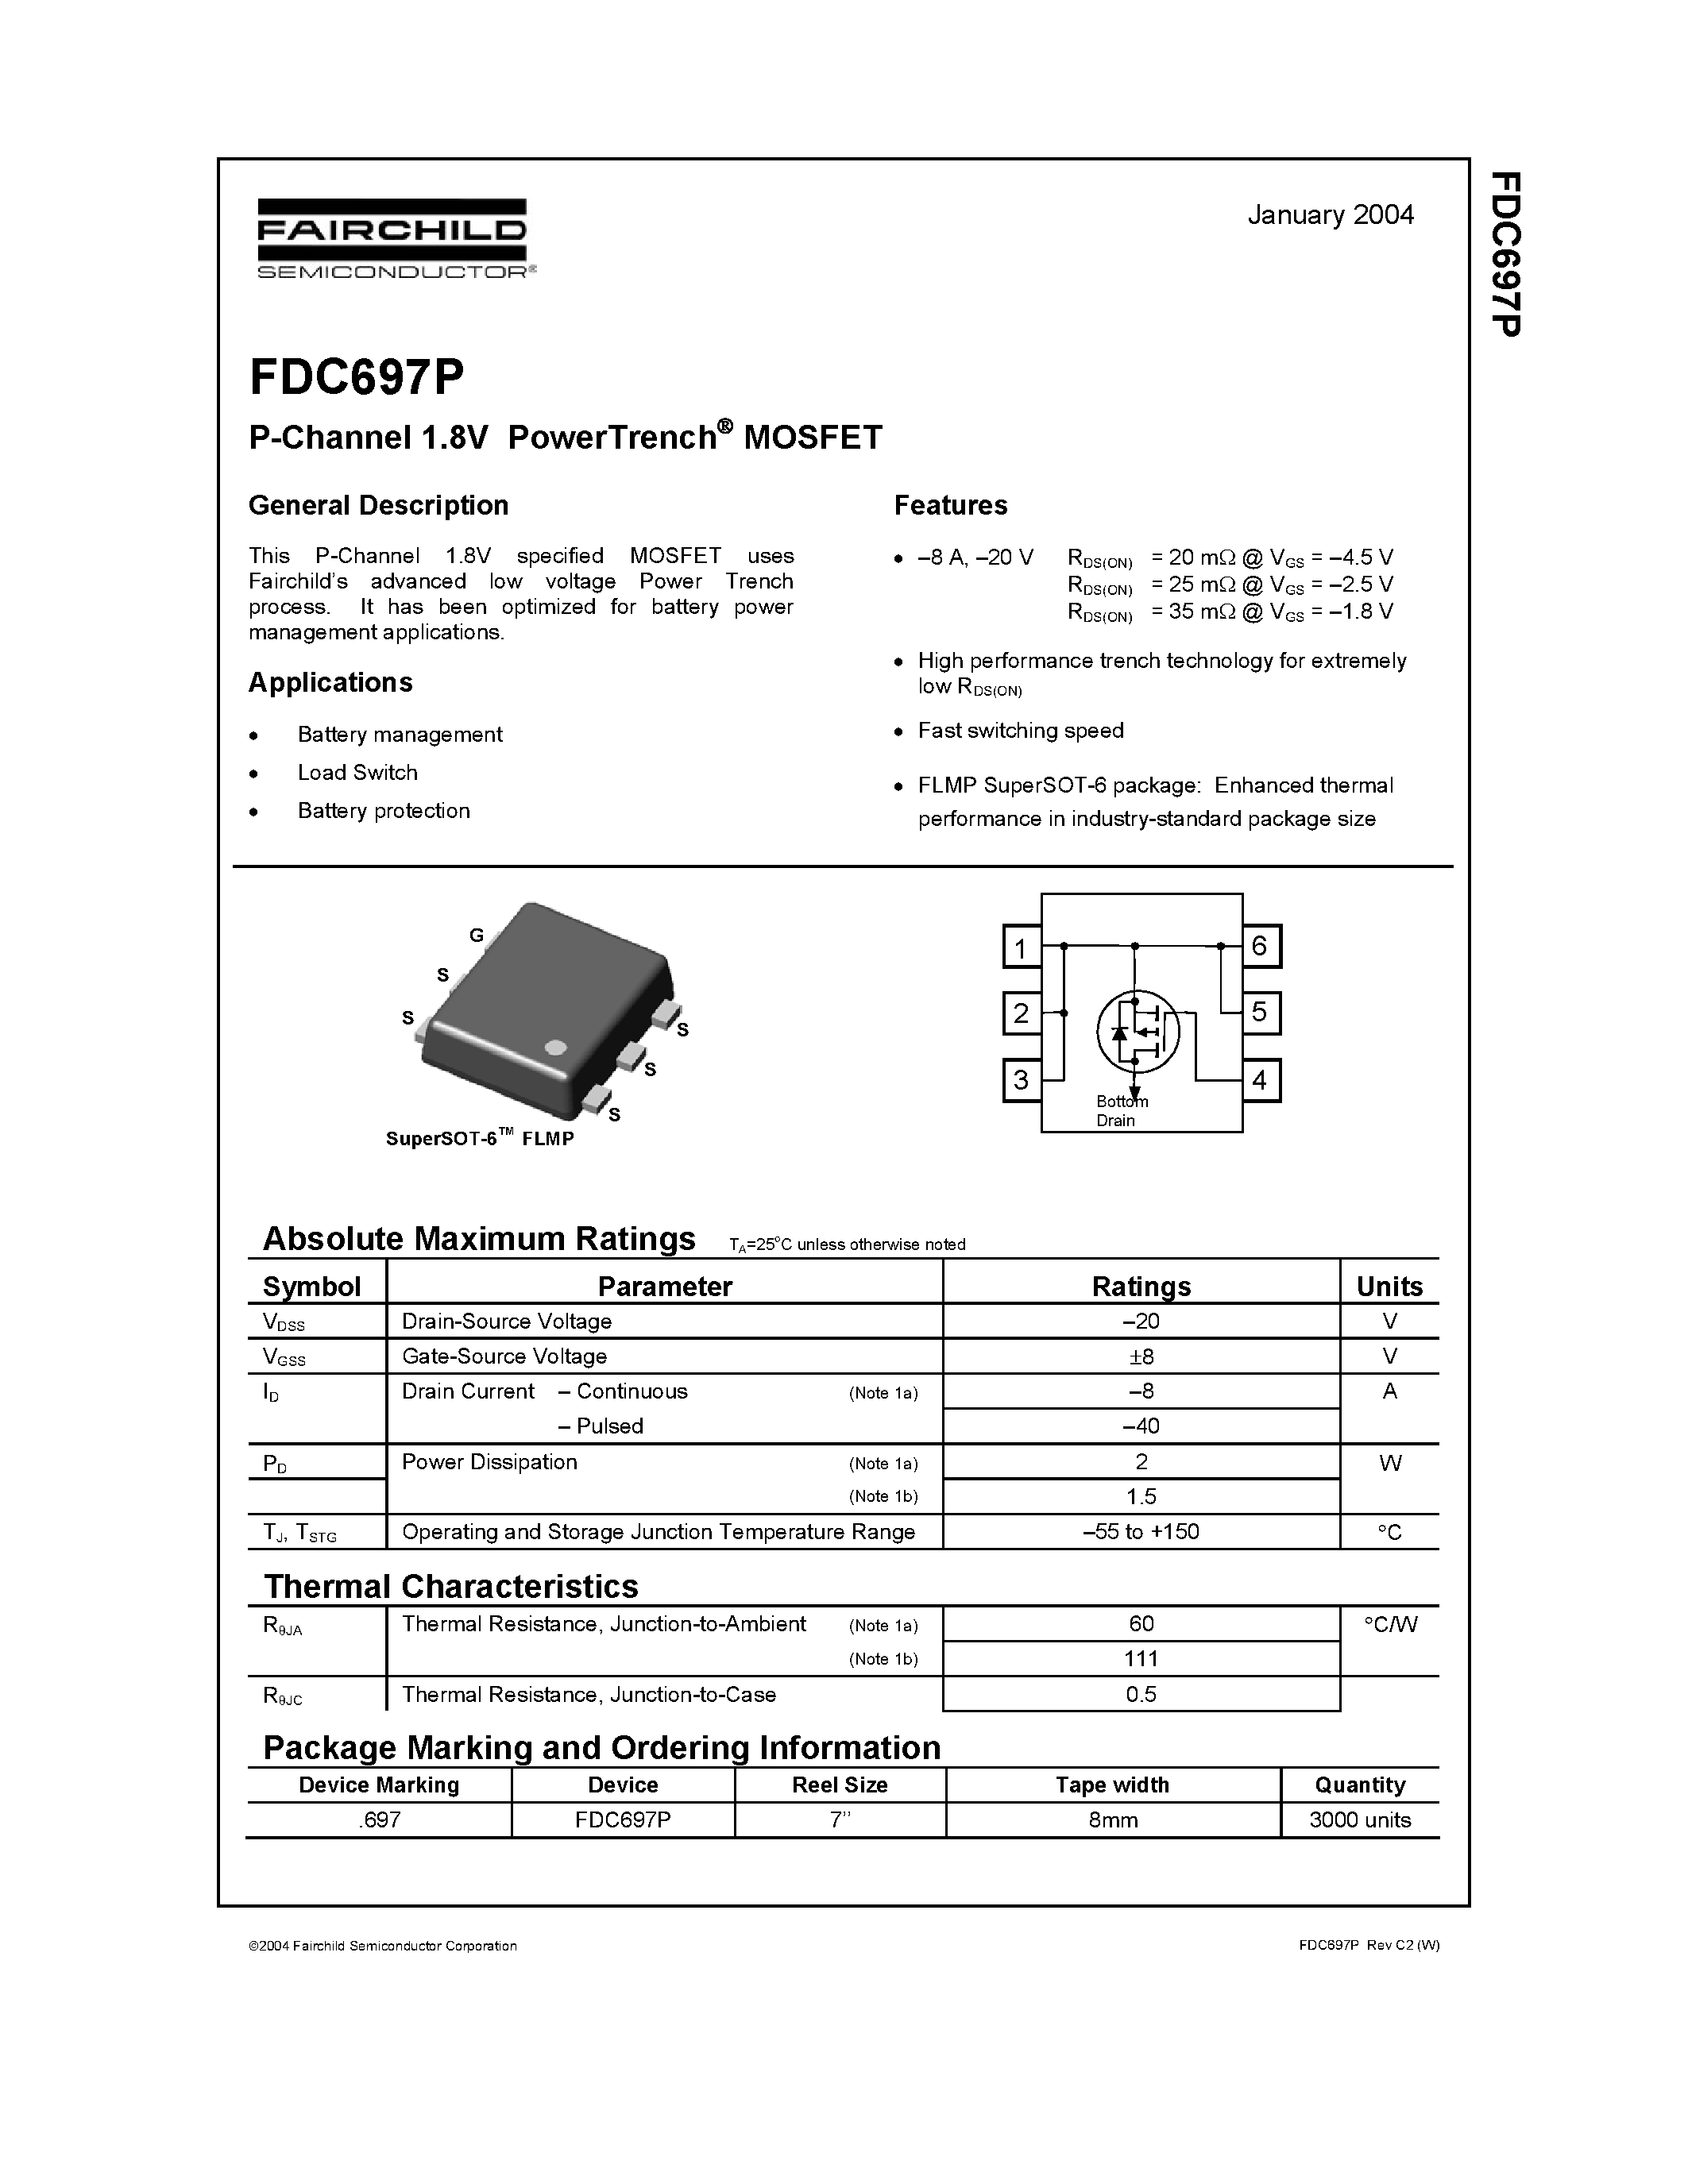 Даташит FDC697P - P-Channel 1.8V PowerTrench MOSFET страница 1